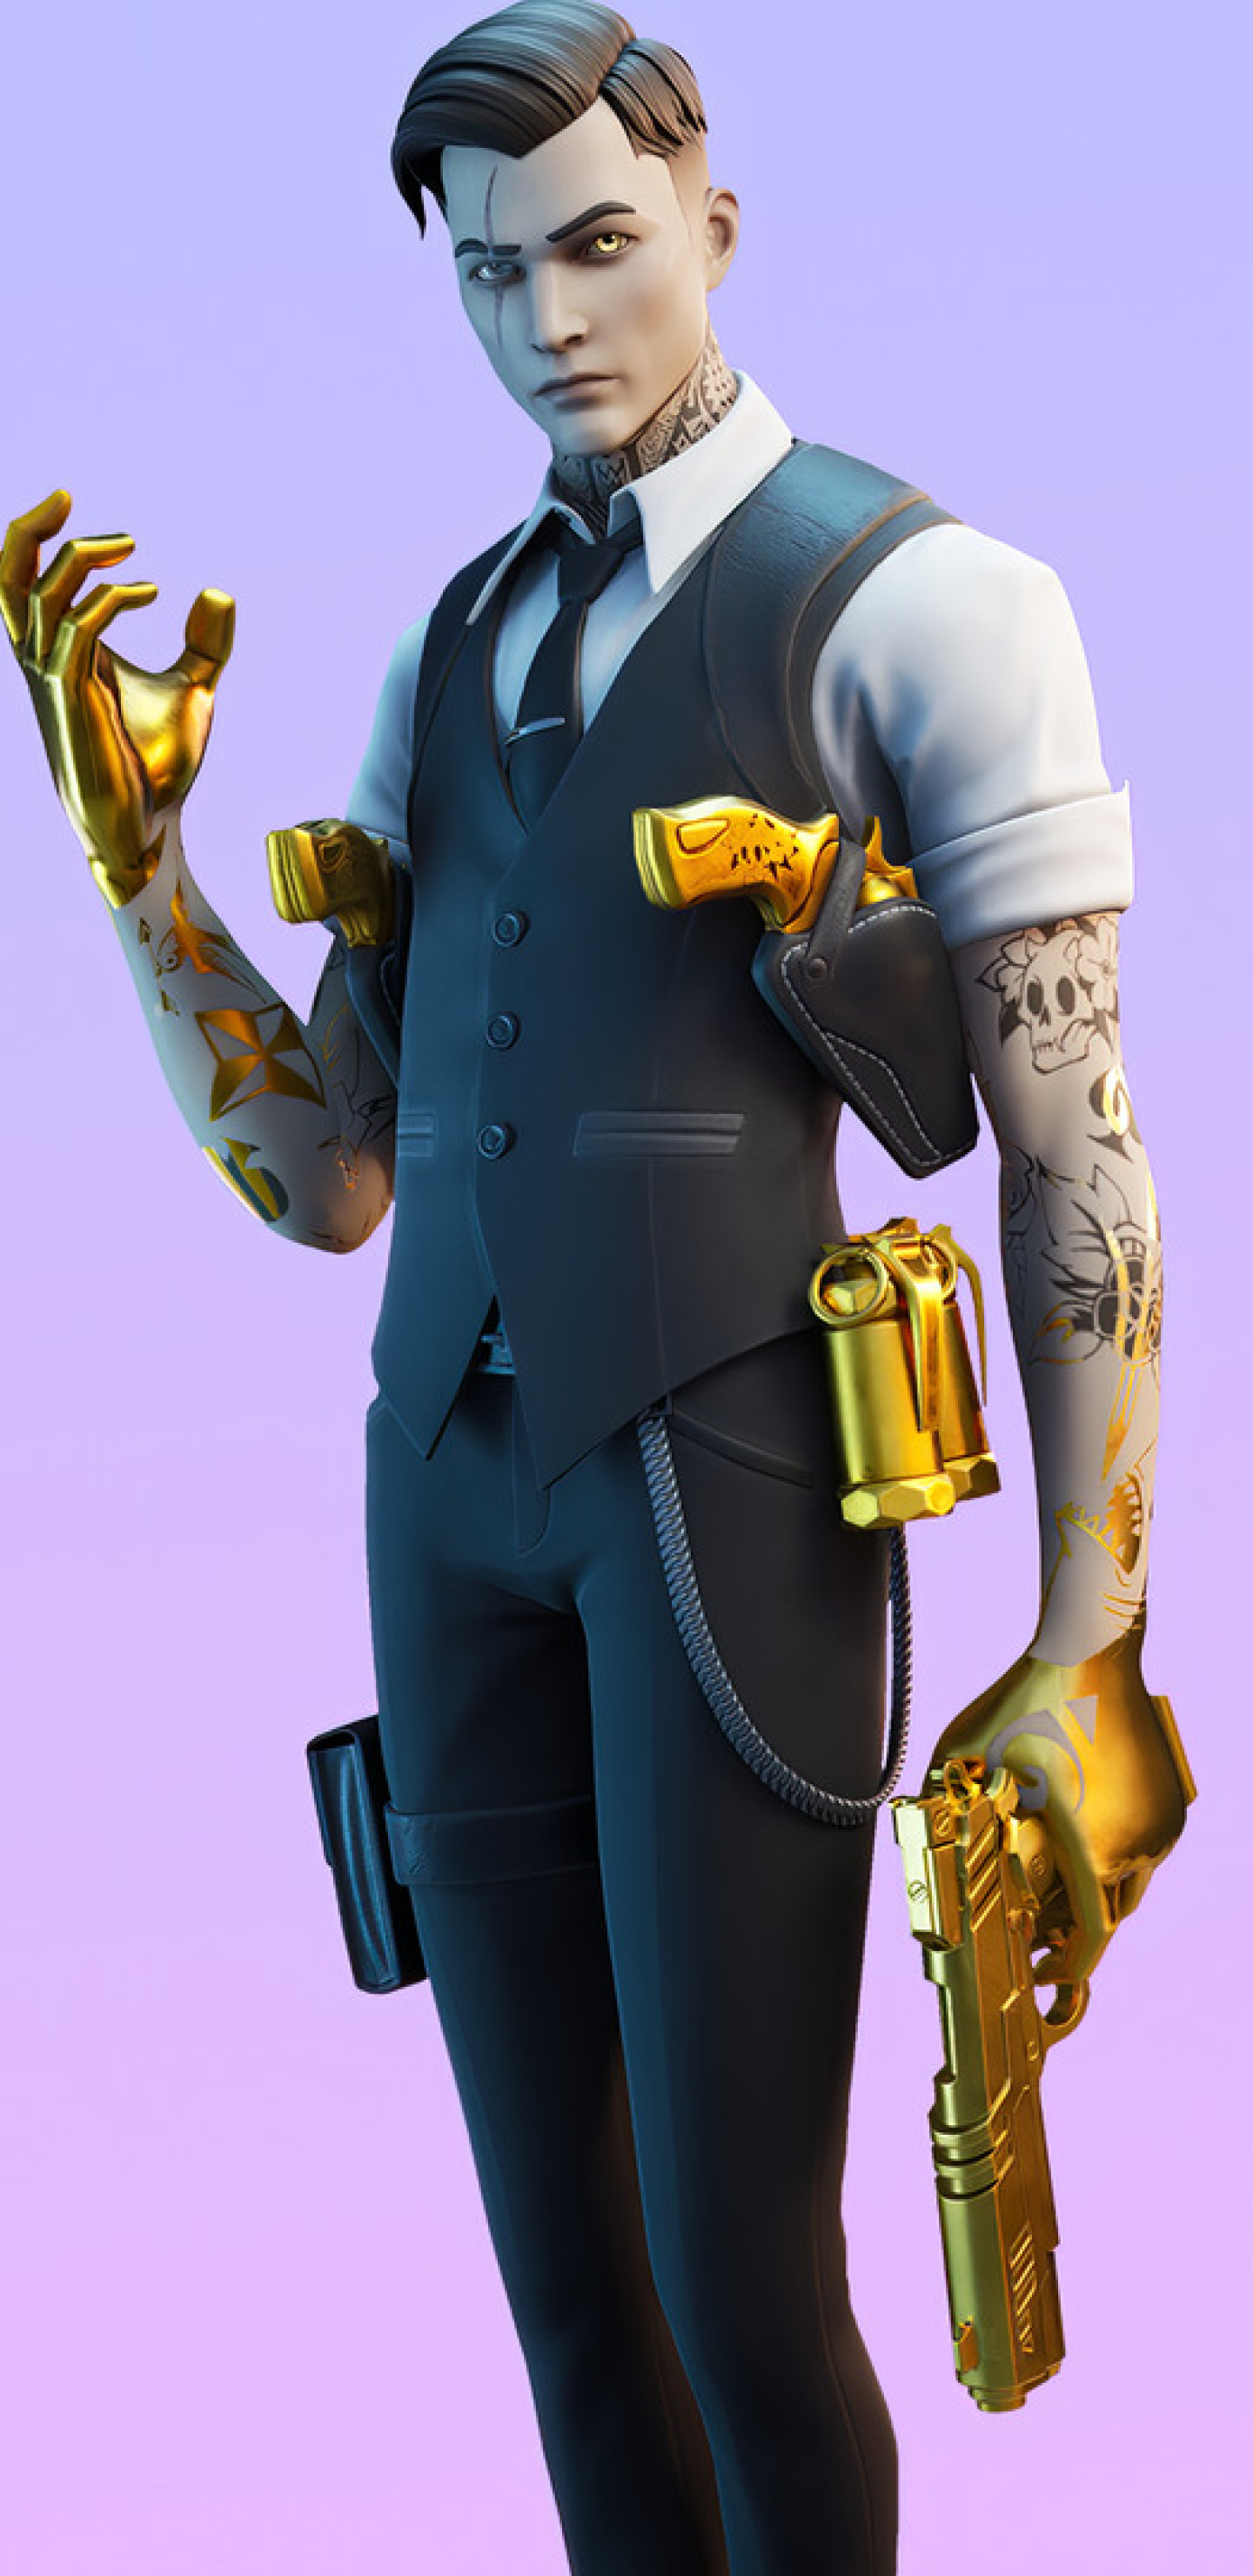 1440x2960 Fortnite Midas Skin 4K Outfit Samsung Galaxy Note 9,8, S9,S8